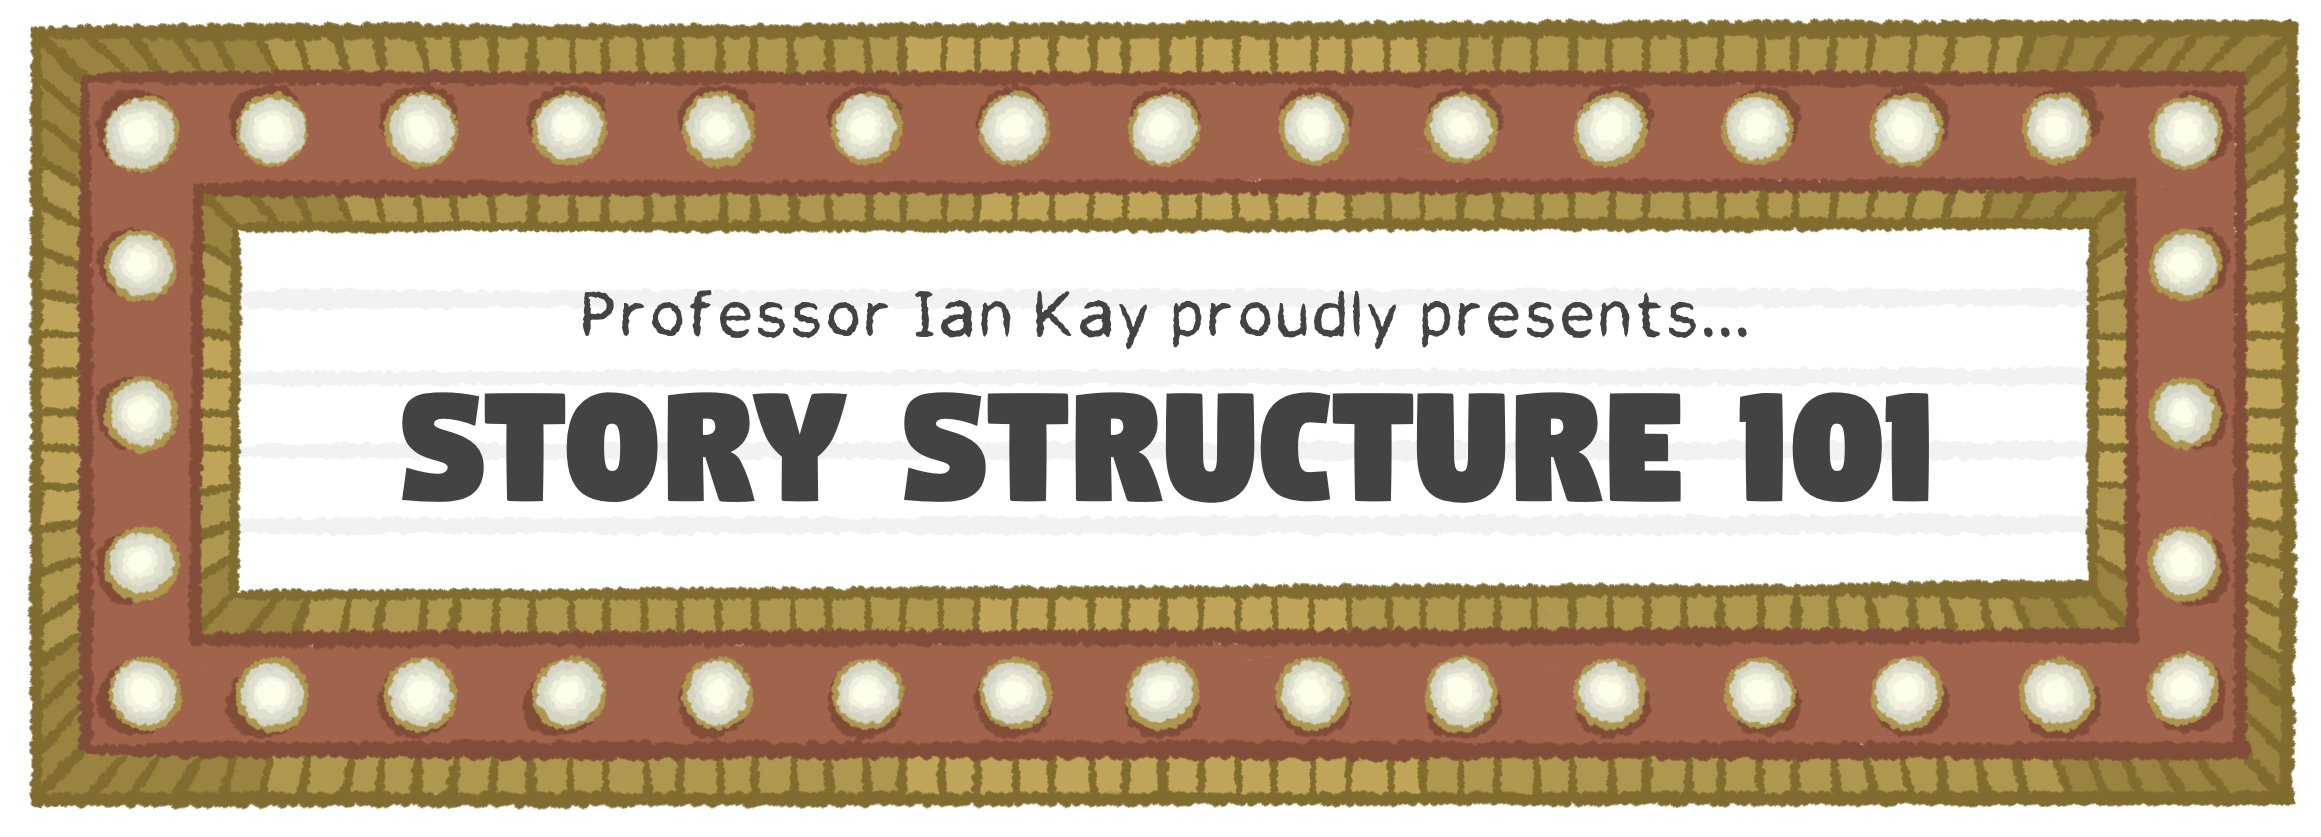 Professor Ian Kay proudly presents... Story Structure 101